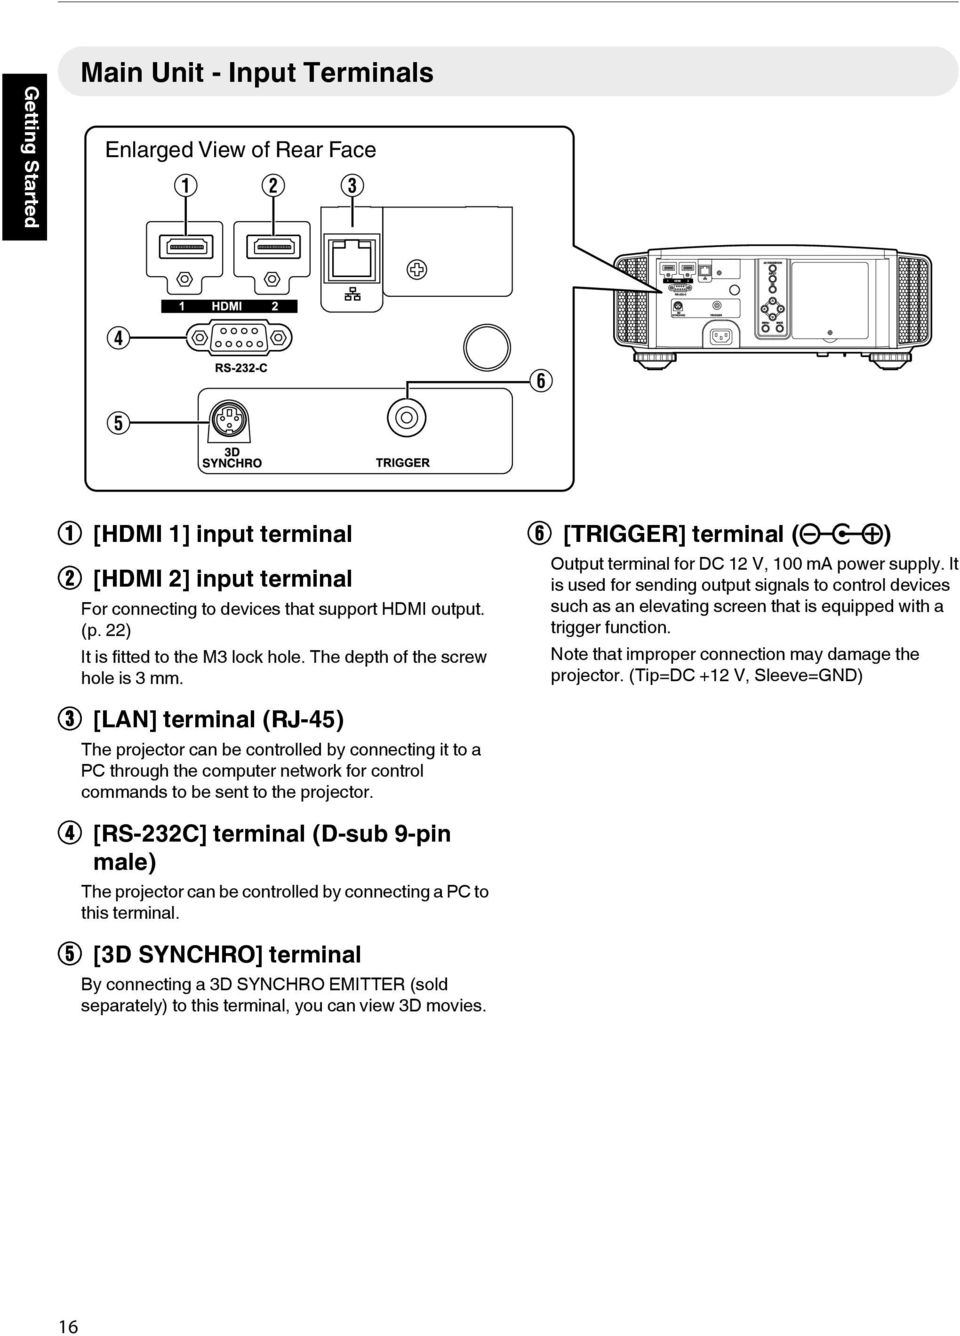 as an elevating screen that is equipped with a trigger function Note that improper connection may damage the projector (Tip=DC +12 V, Sleeve=GND) C [LAN] terminal (RJ-45) The projector can be